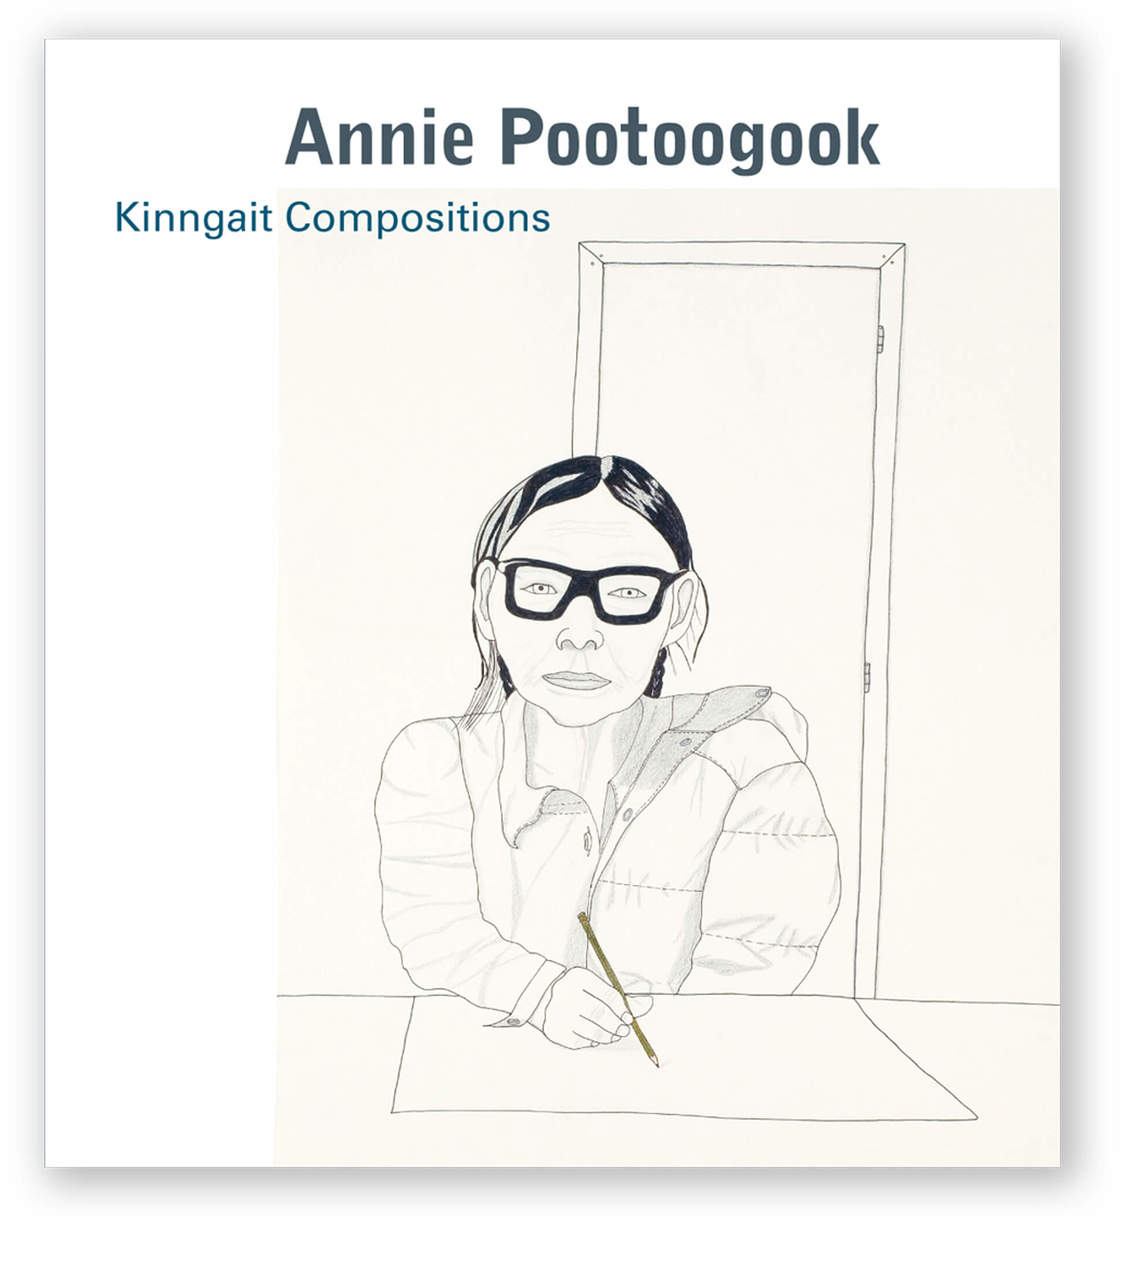 Cover of Annie Pootoogook: Kinngait Compositions, 2011, by Jan Allen